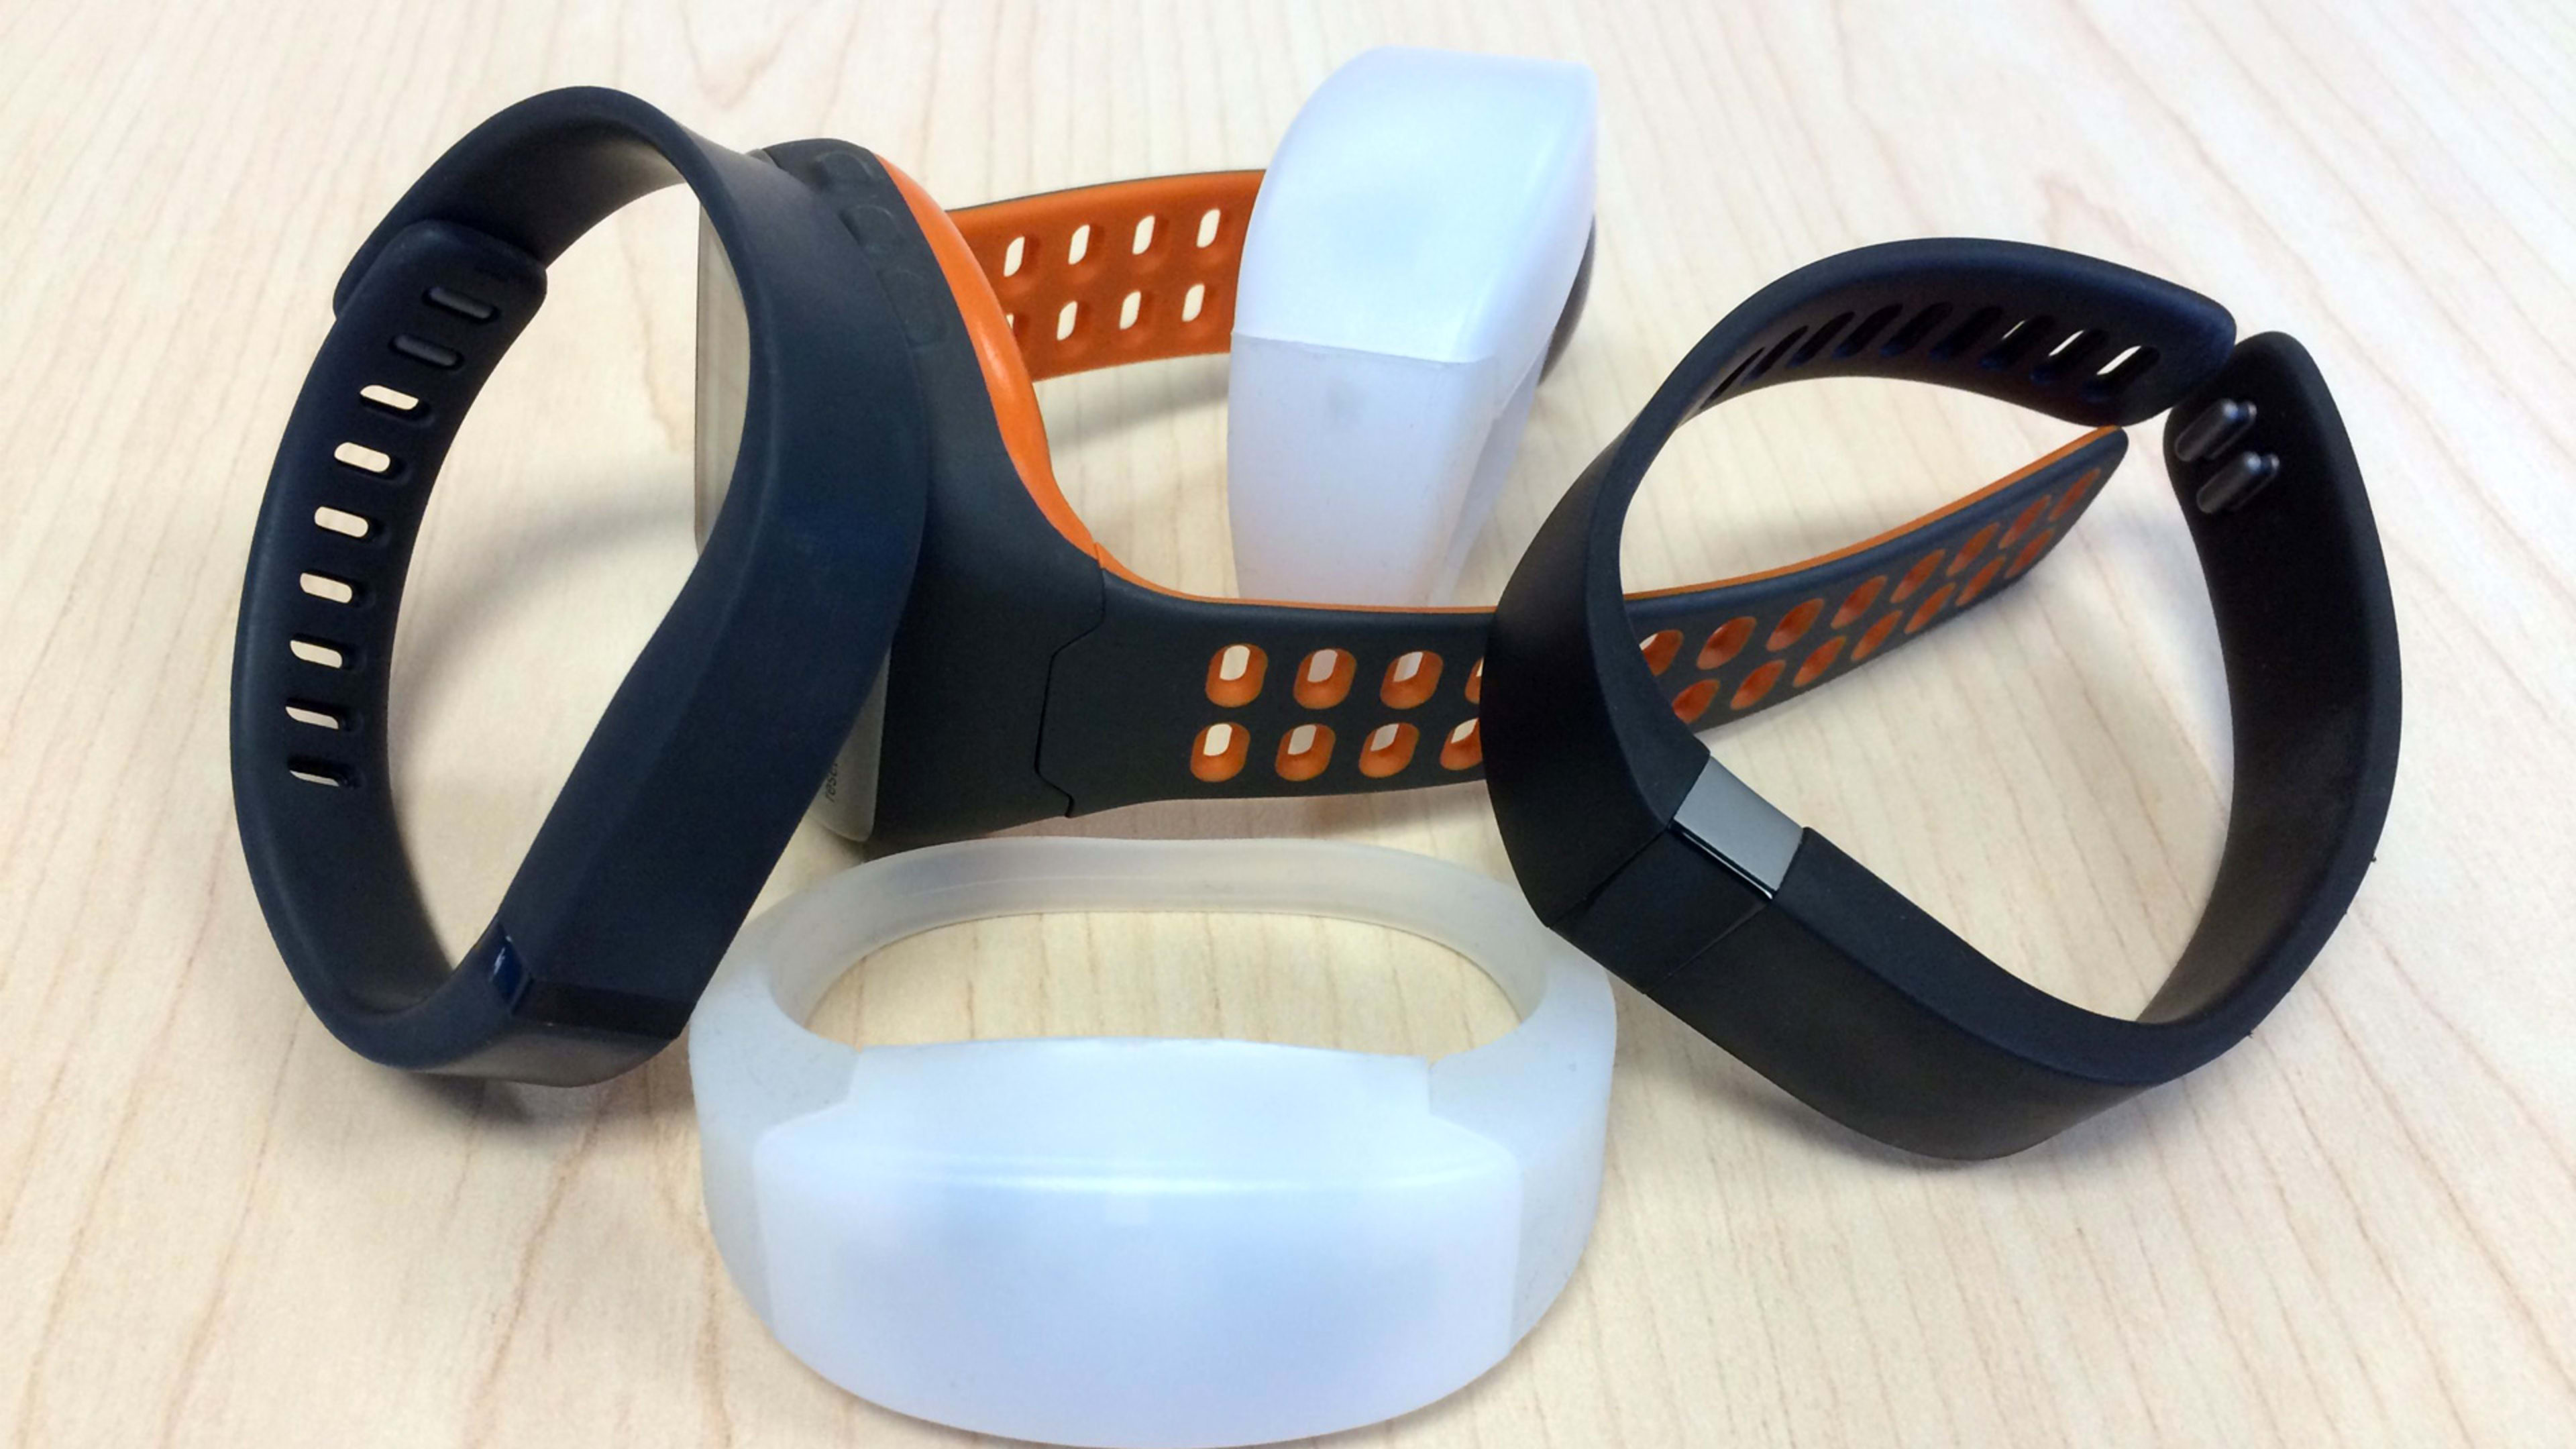 Why We Don’t Talk About “Wearable Software”